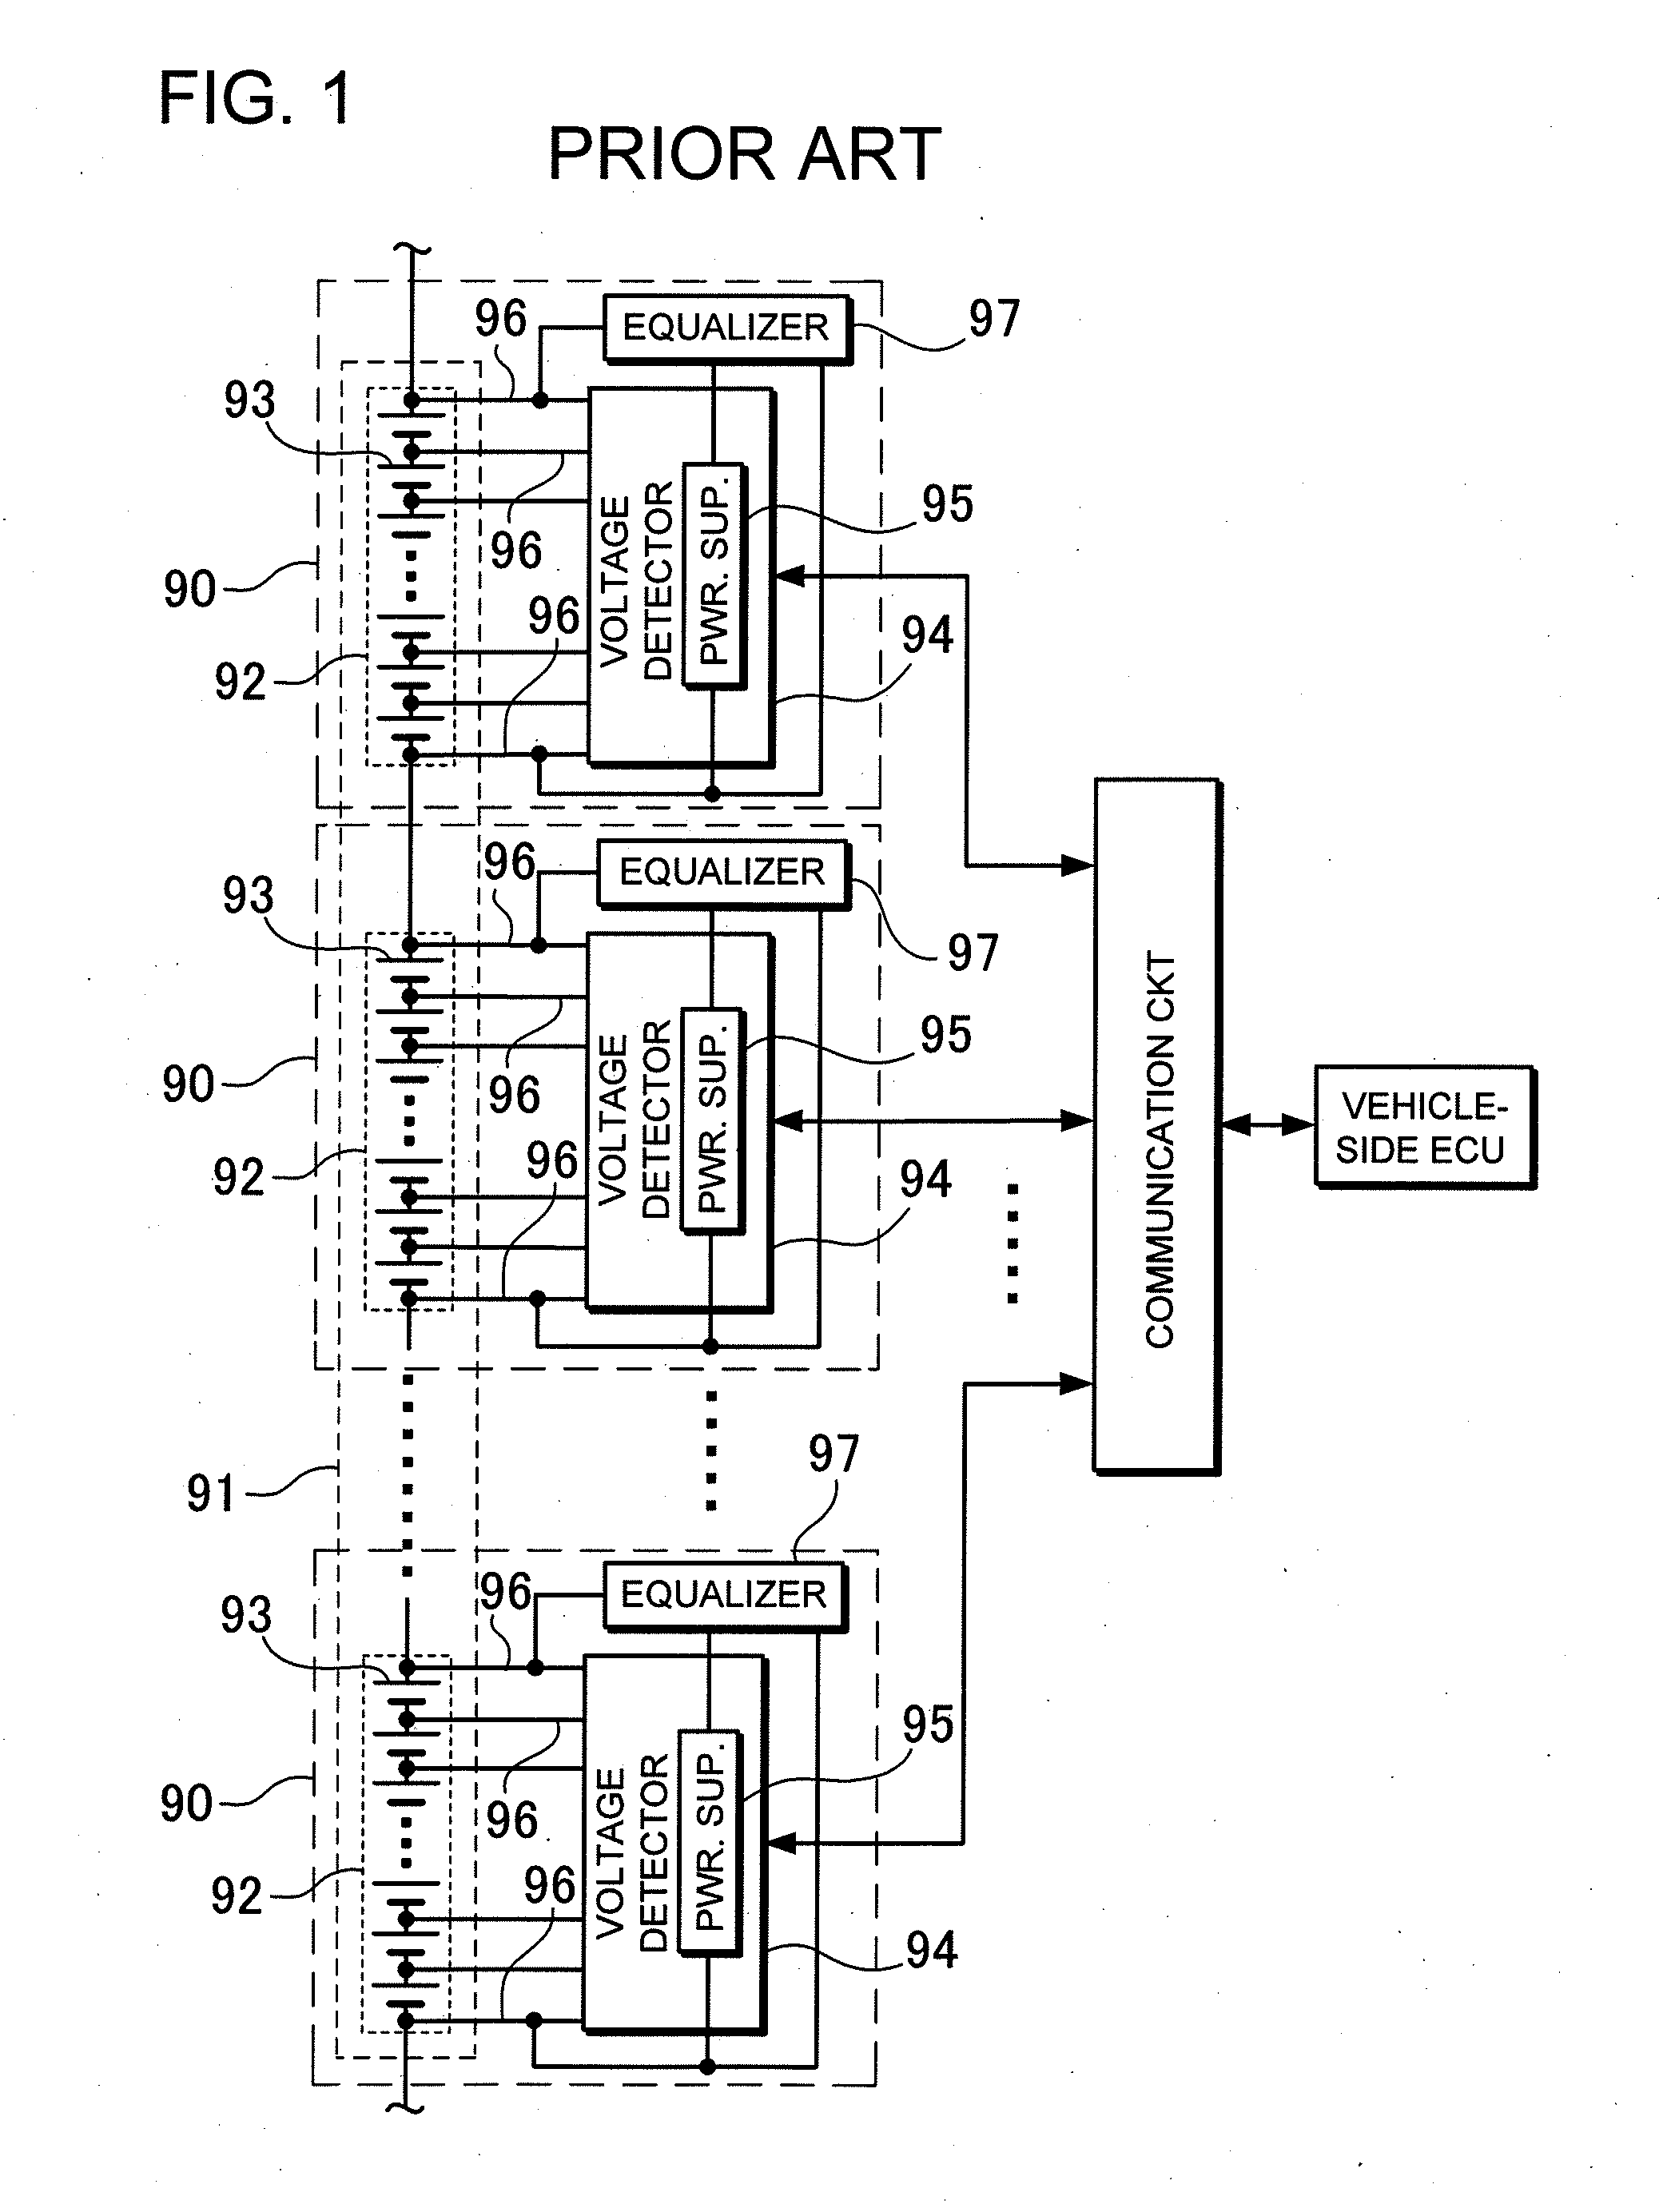 Power supply device for detecting disconnection of voltage detection lines